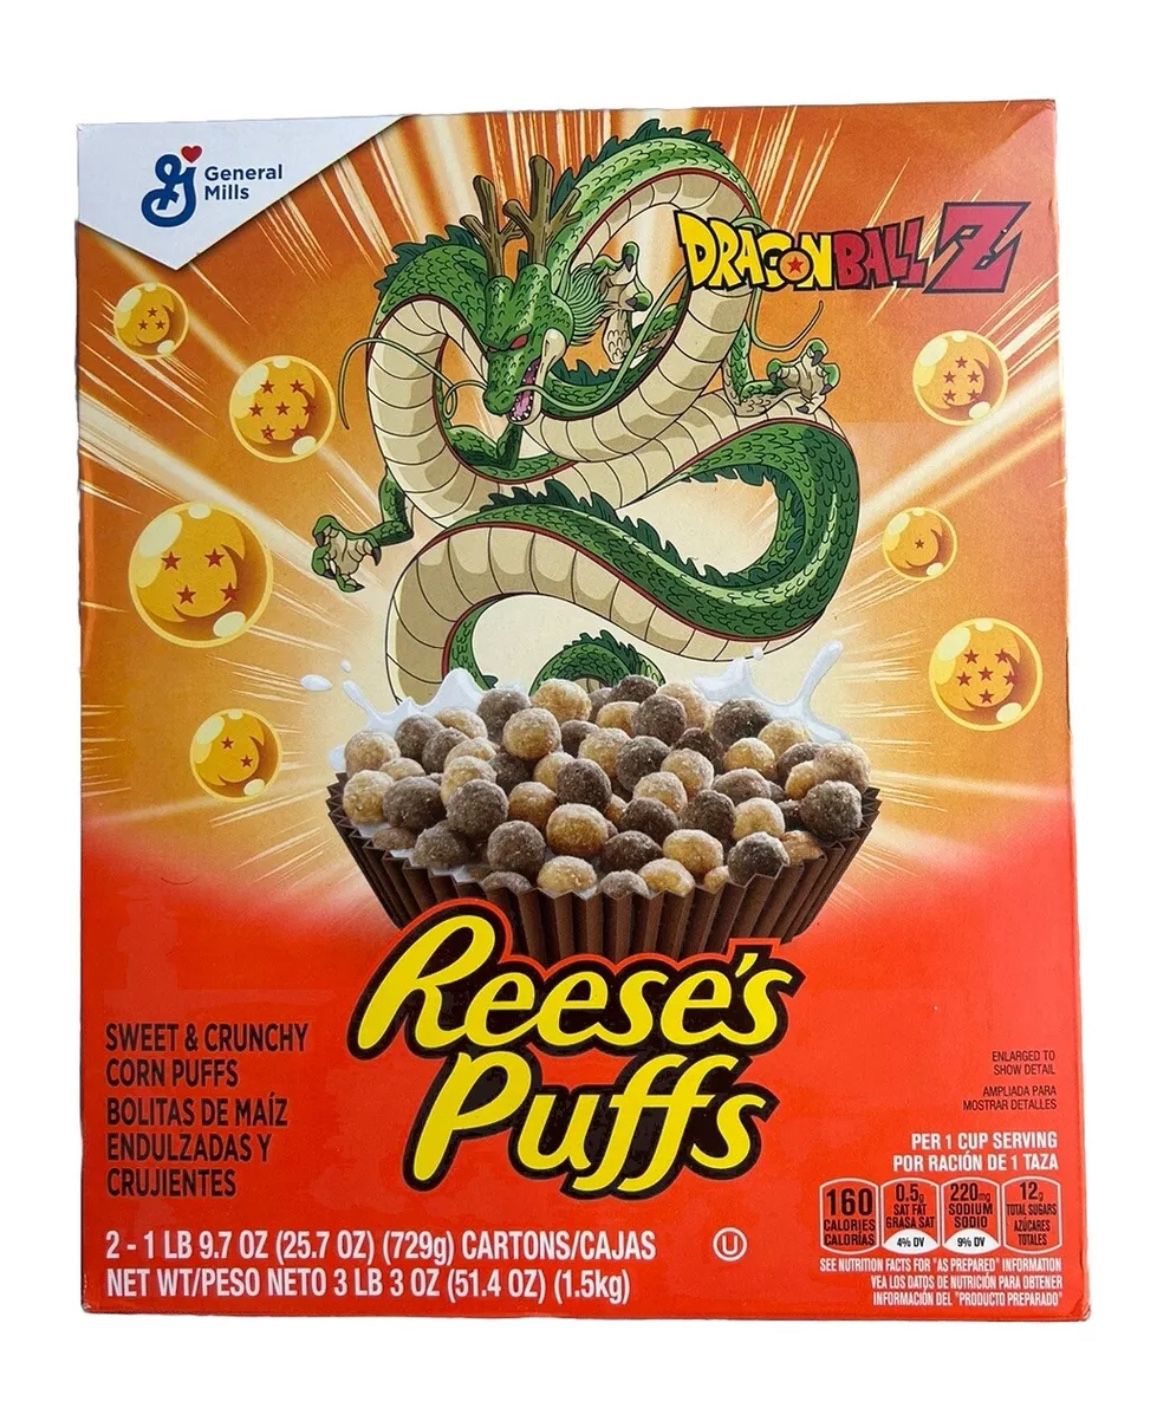 Dragon Ball Z Limited Edition Reese’s Puffs Cereal Shenron Box